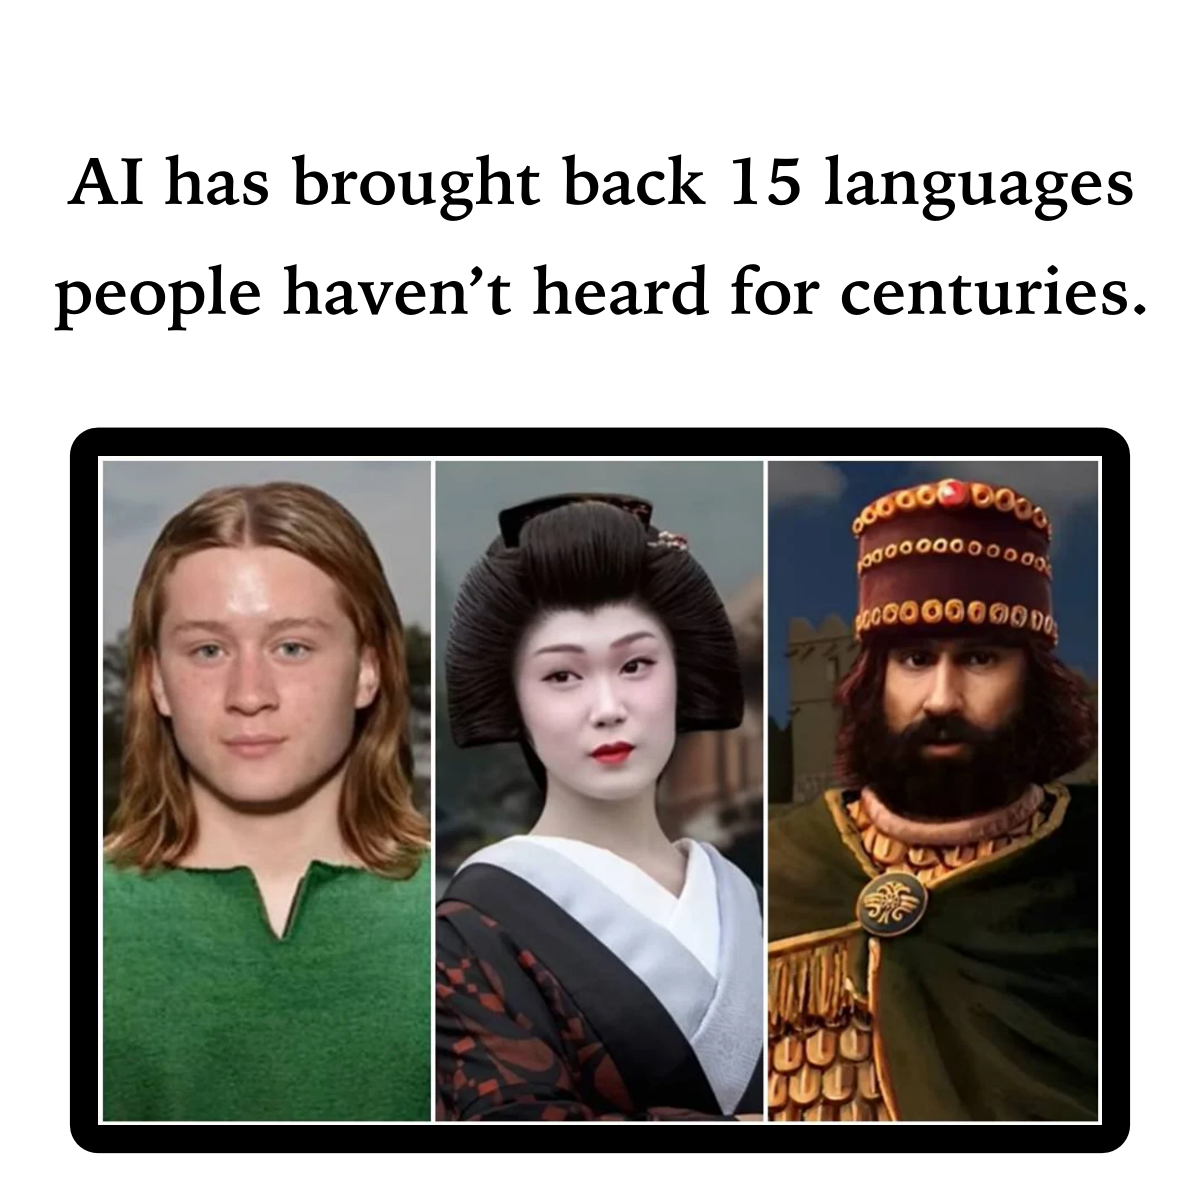 AI has brought back 15 languages people haven’t heard for centuries.